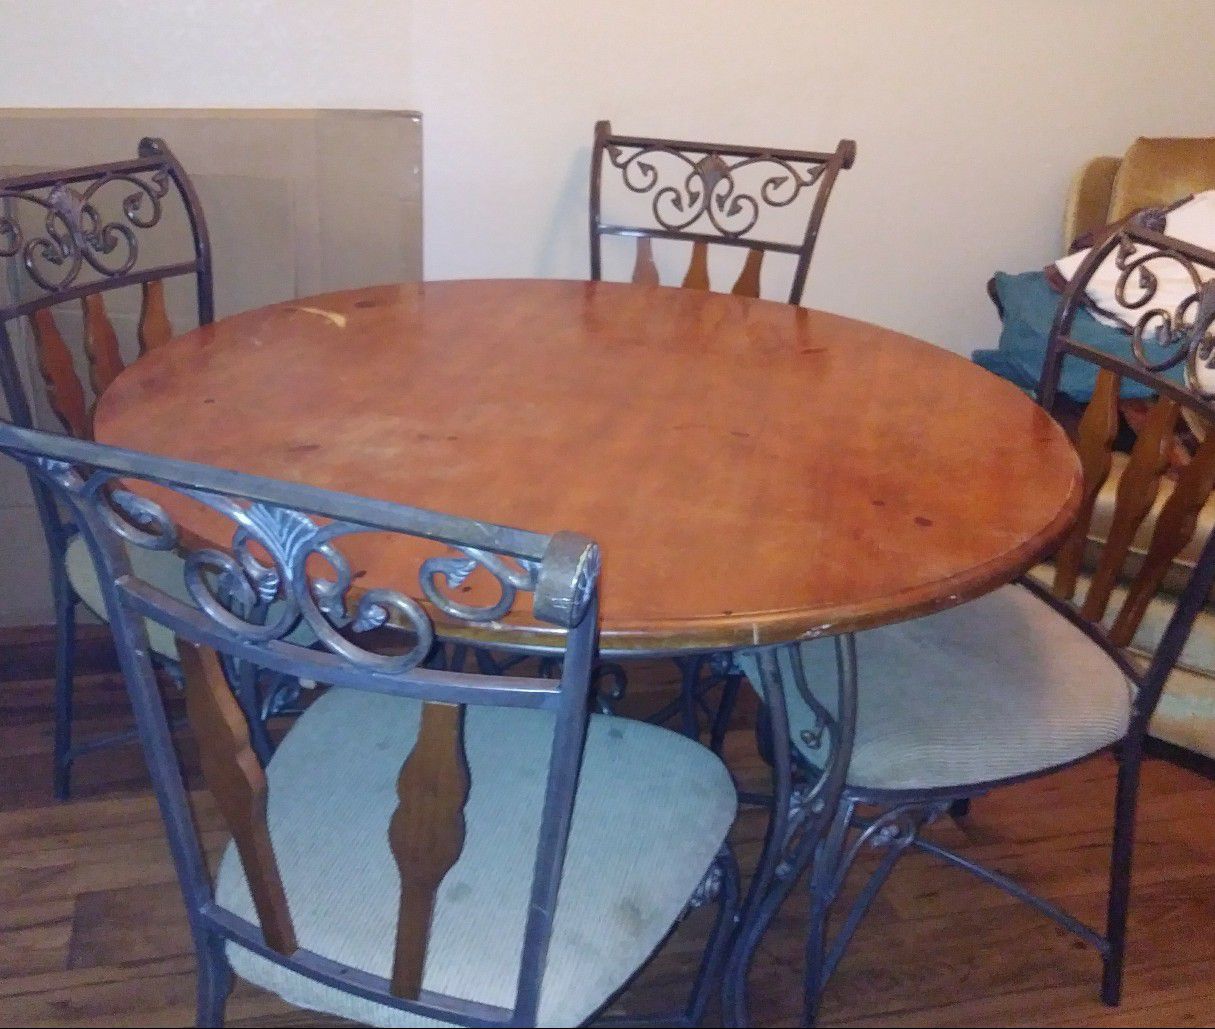 Iron rod table and chairs